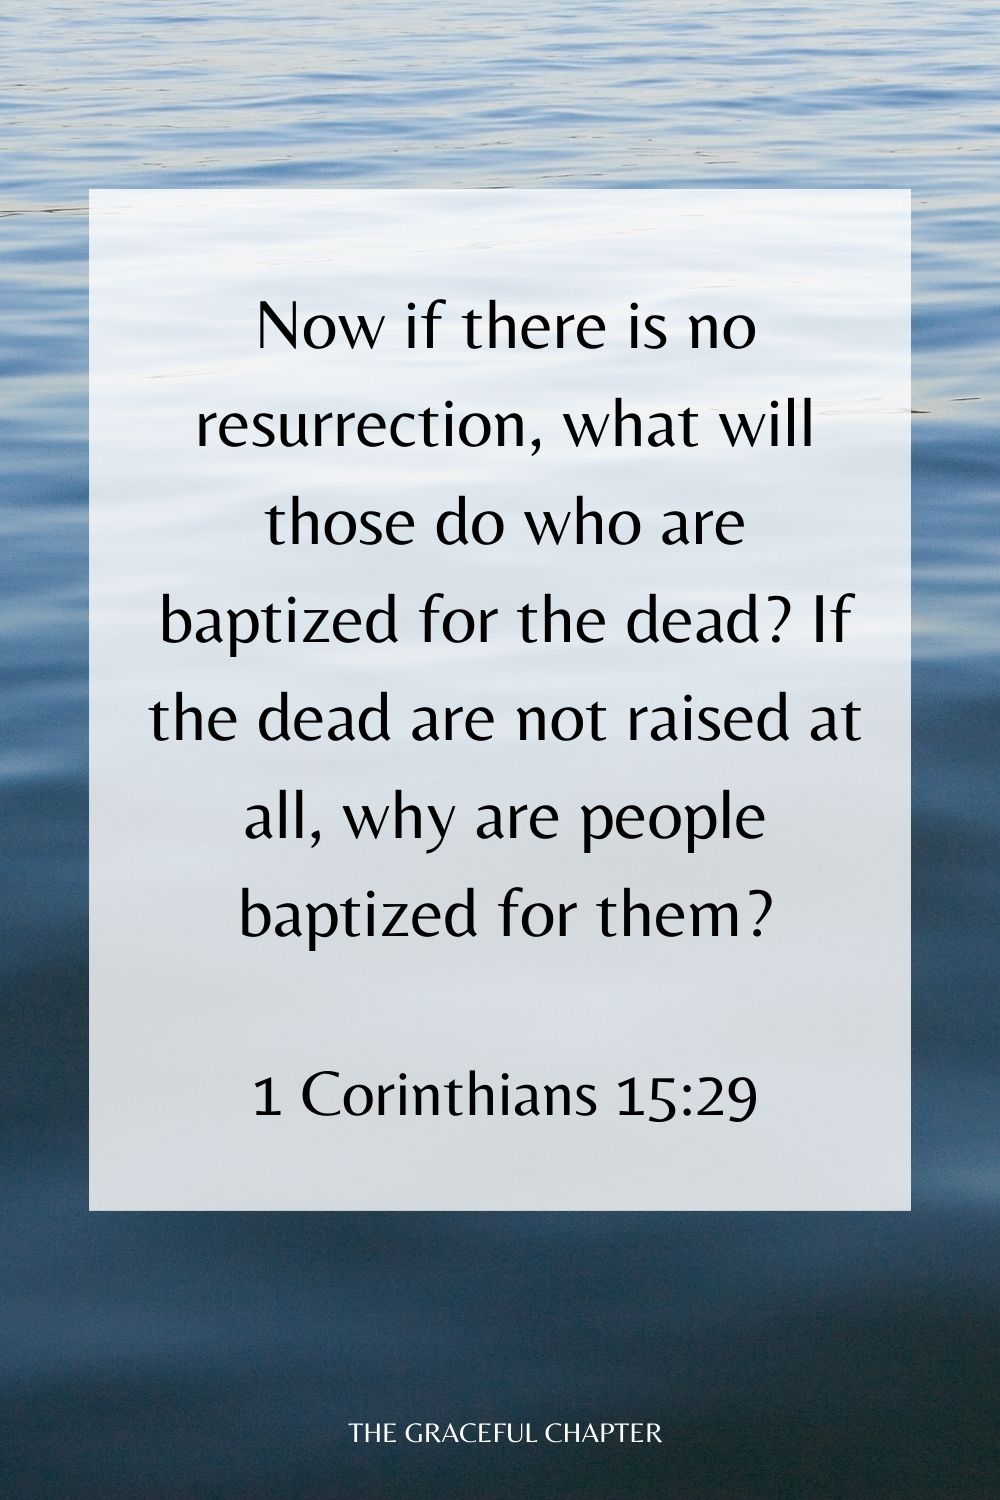 Now if there is no resurrection, what will those do who are baptized for the dead? If the dead are not raised at all, why are people baptized for them? 1 Corinthians 15:29